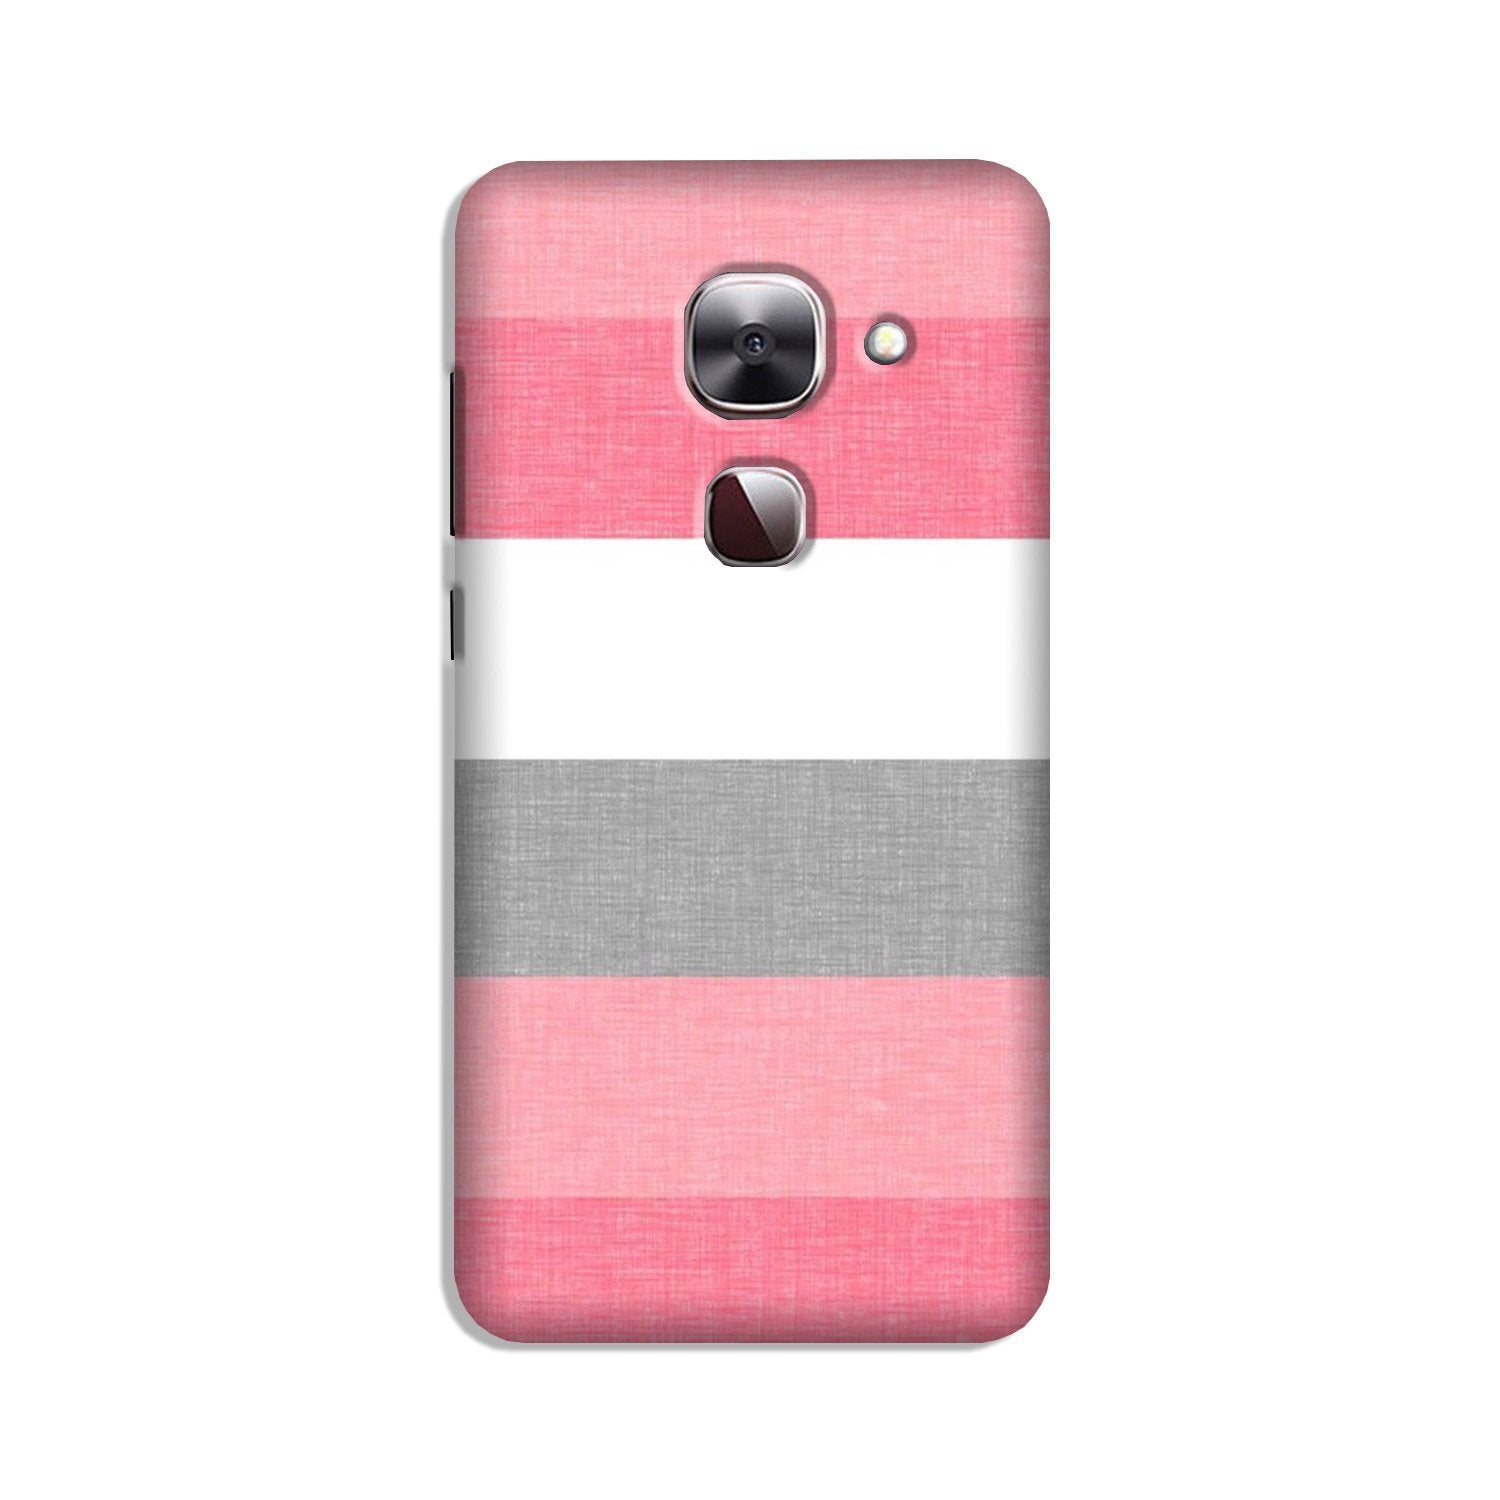 Pink white pattern Case for LeEco le 2s